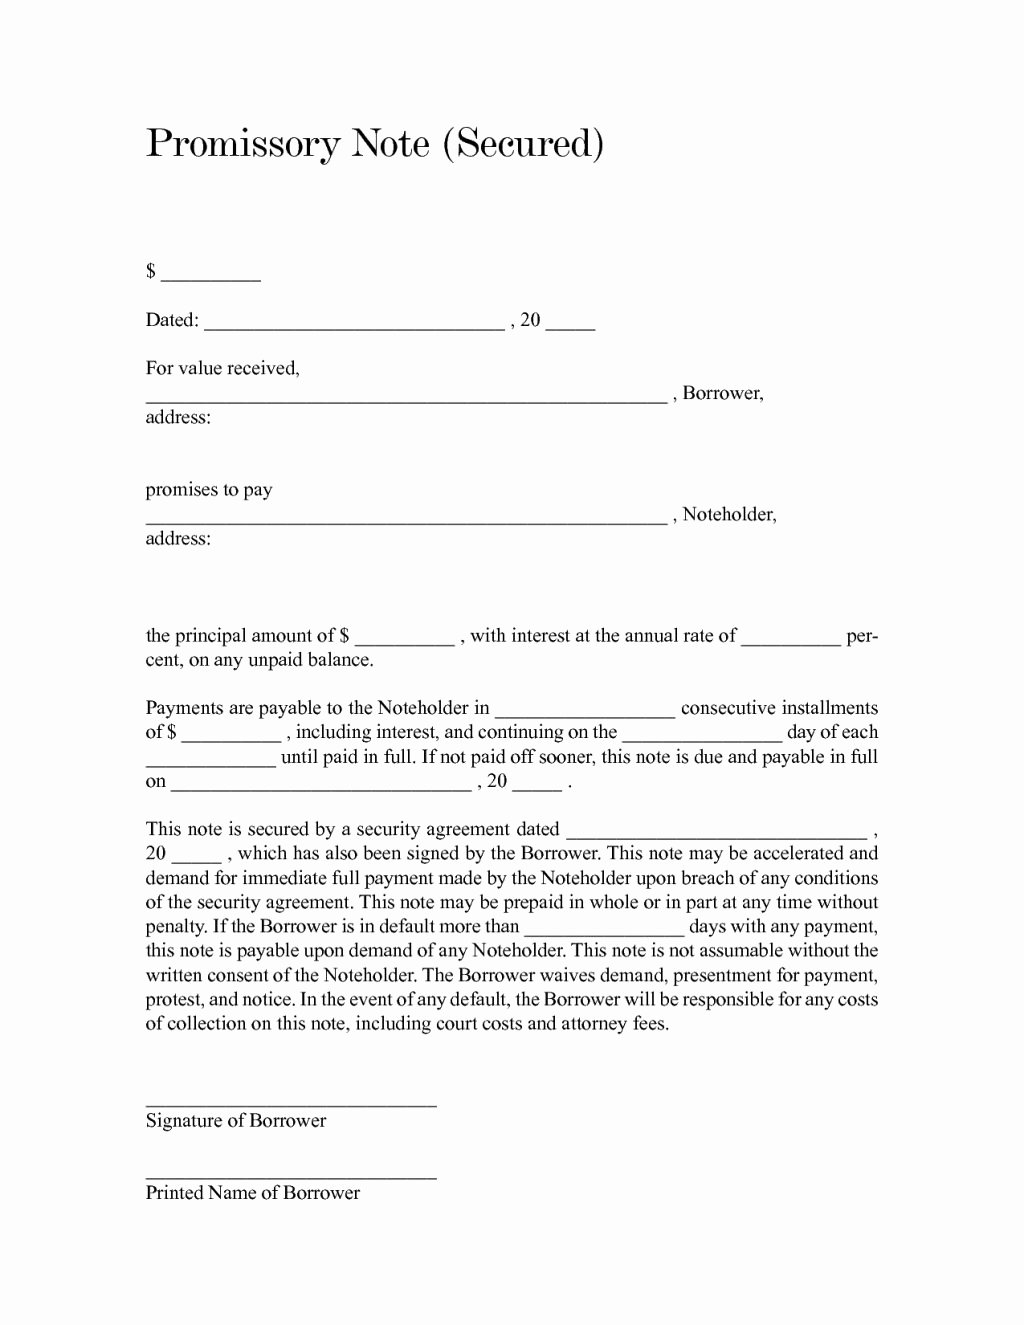 Secured Promissory Note Template Pdf Inspirational Blank and Fill Able Secured Promissory Note form Sample